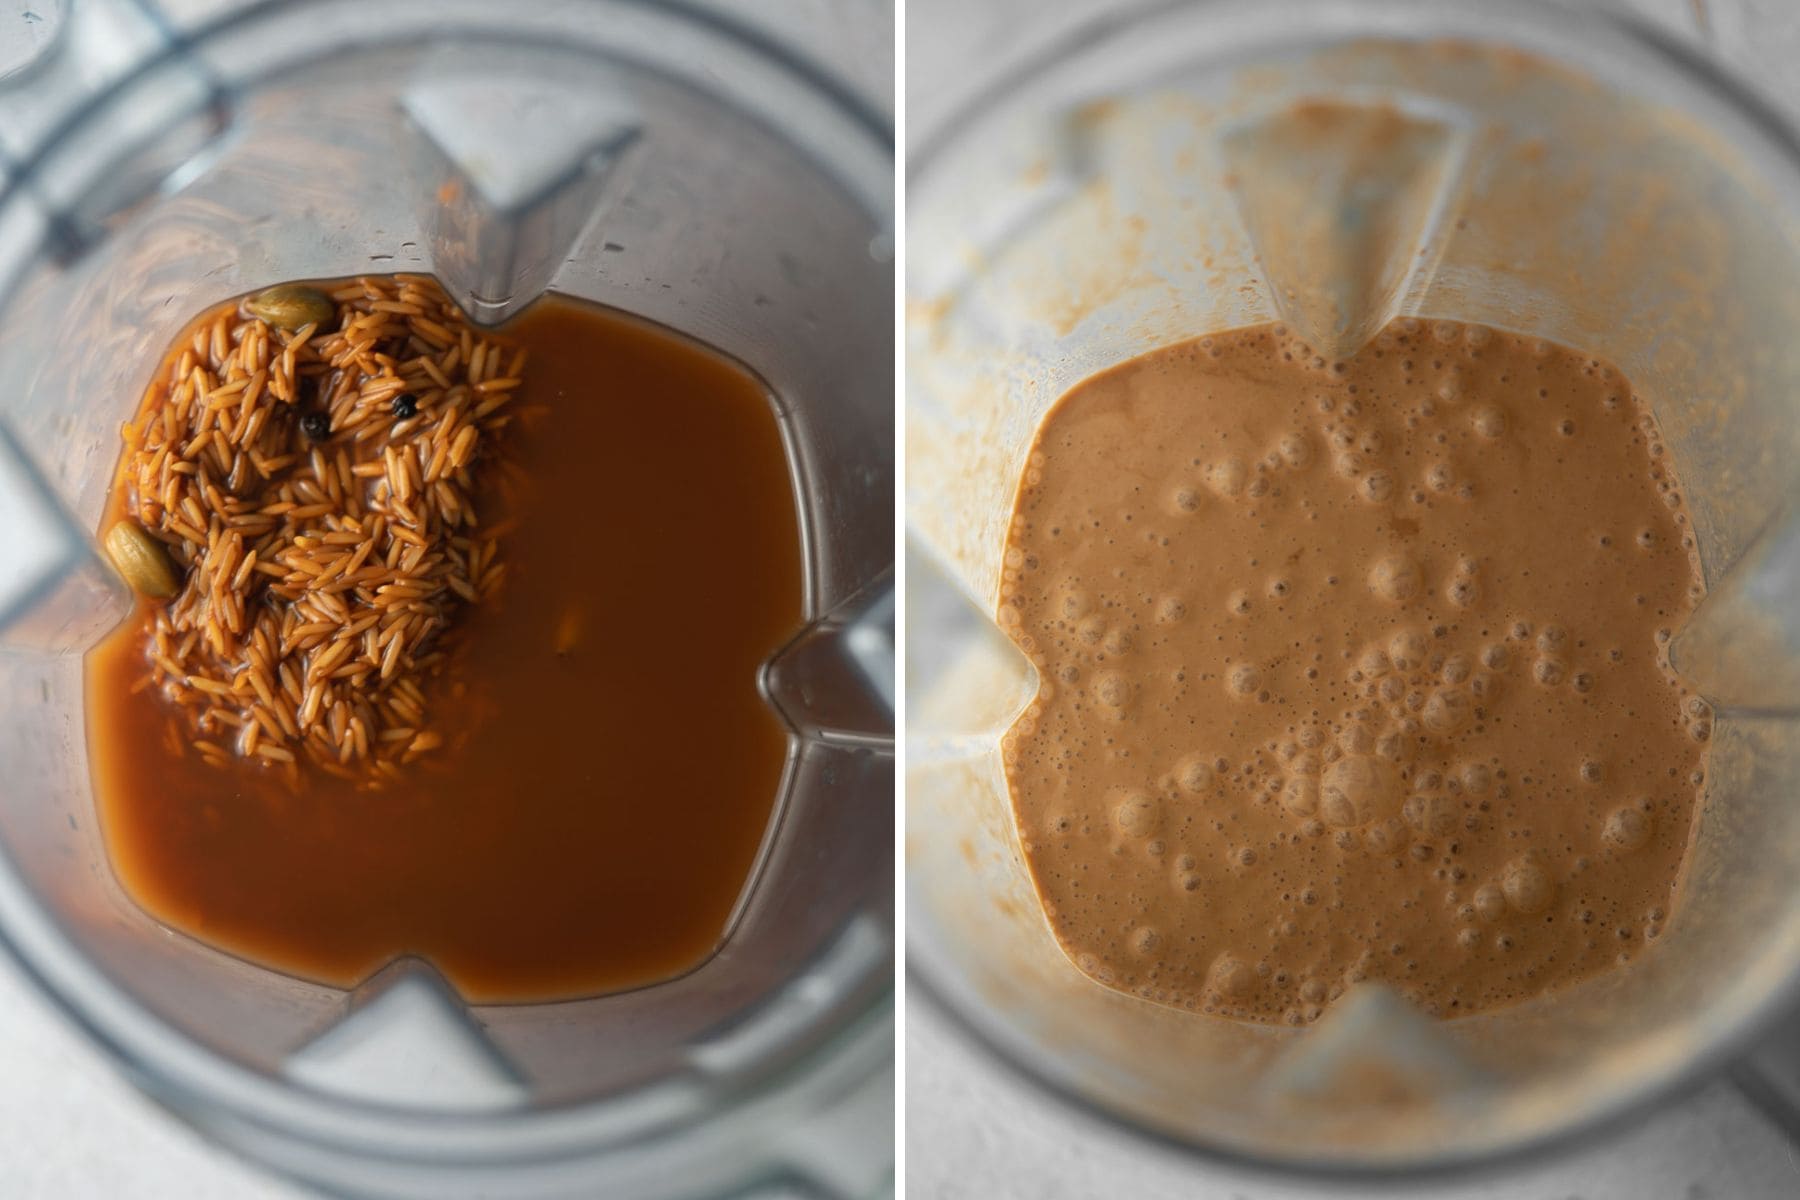 Collage of chai horchata ingredients in a blender and then blended.